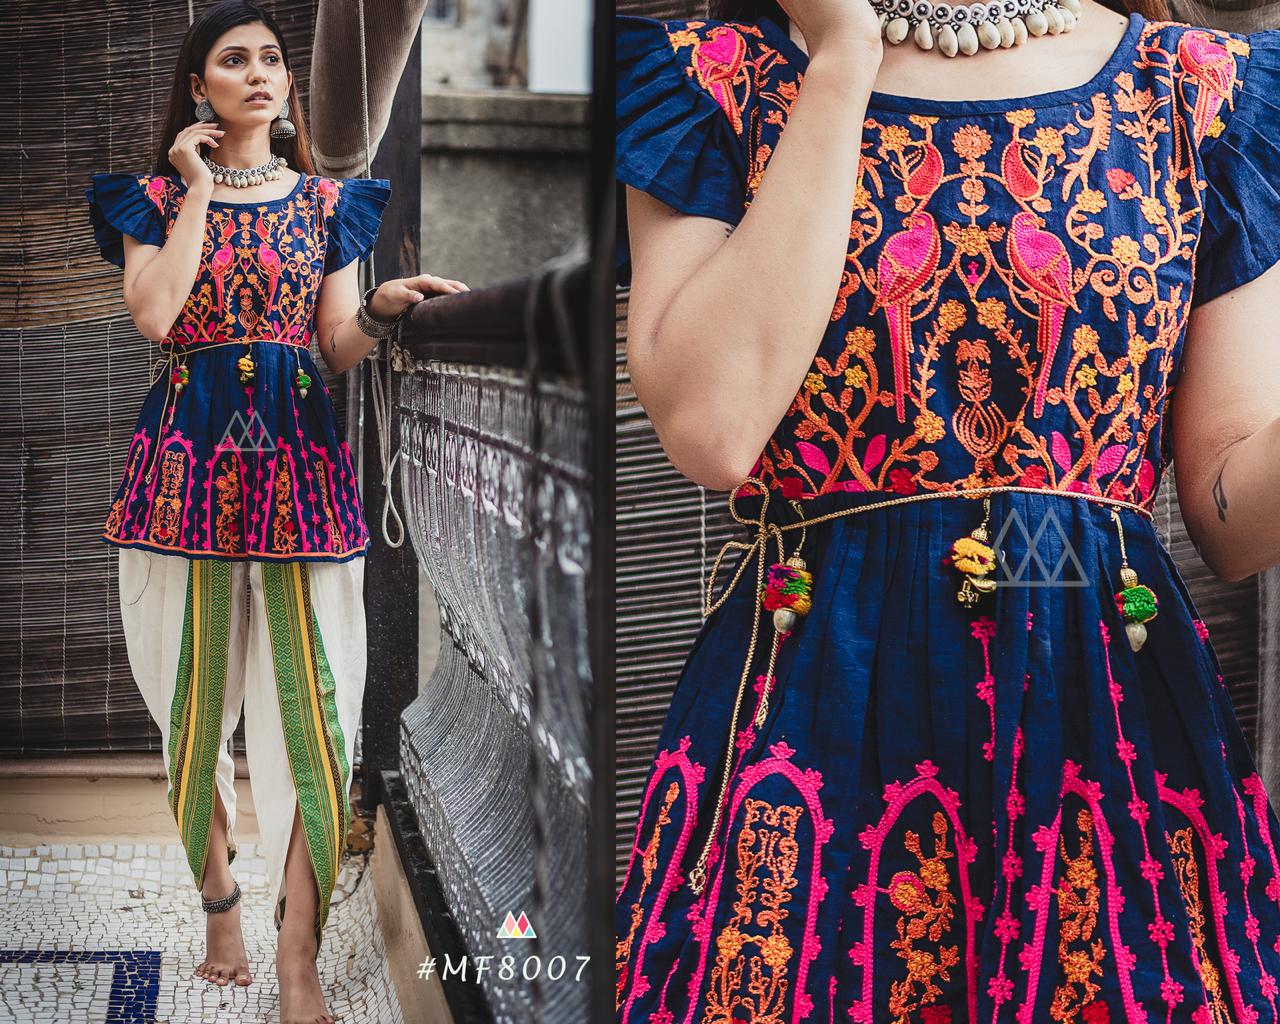 Mesmora launch dholida a female kedia collection amazing navratri trendy western look flairy kedias and tulip pants concept